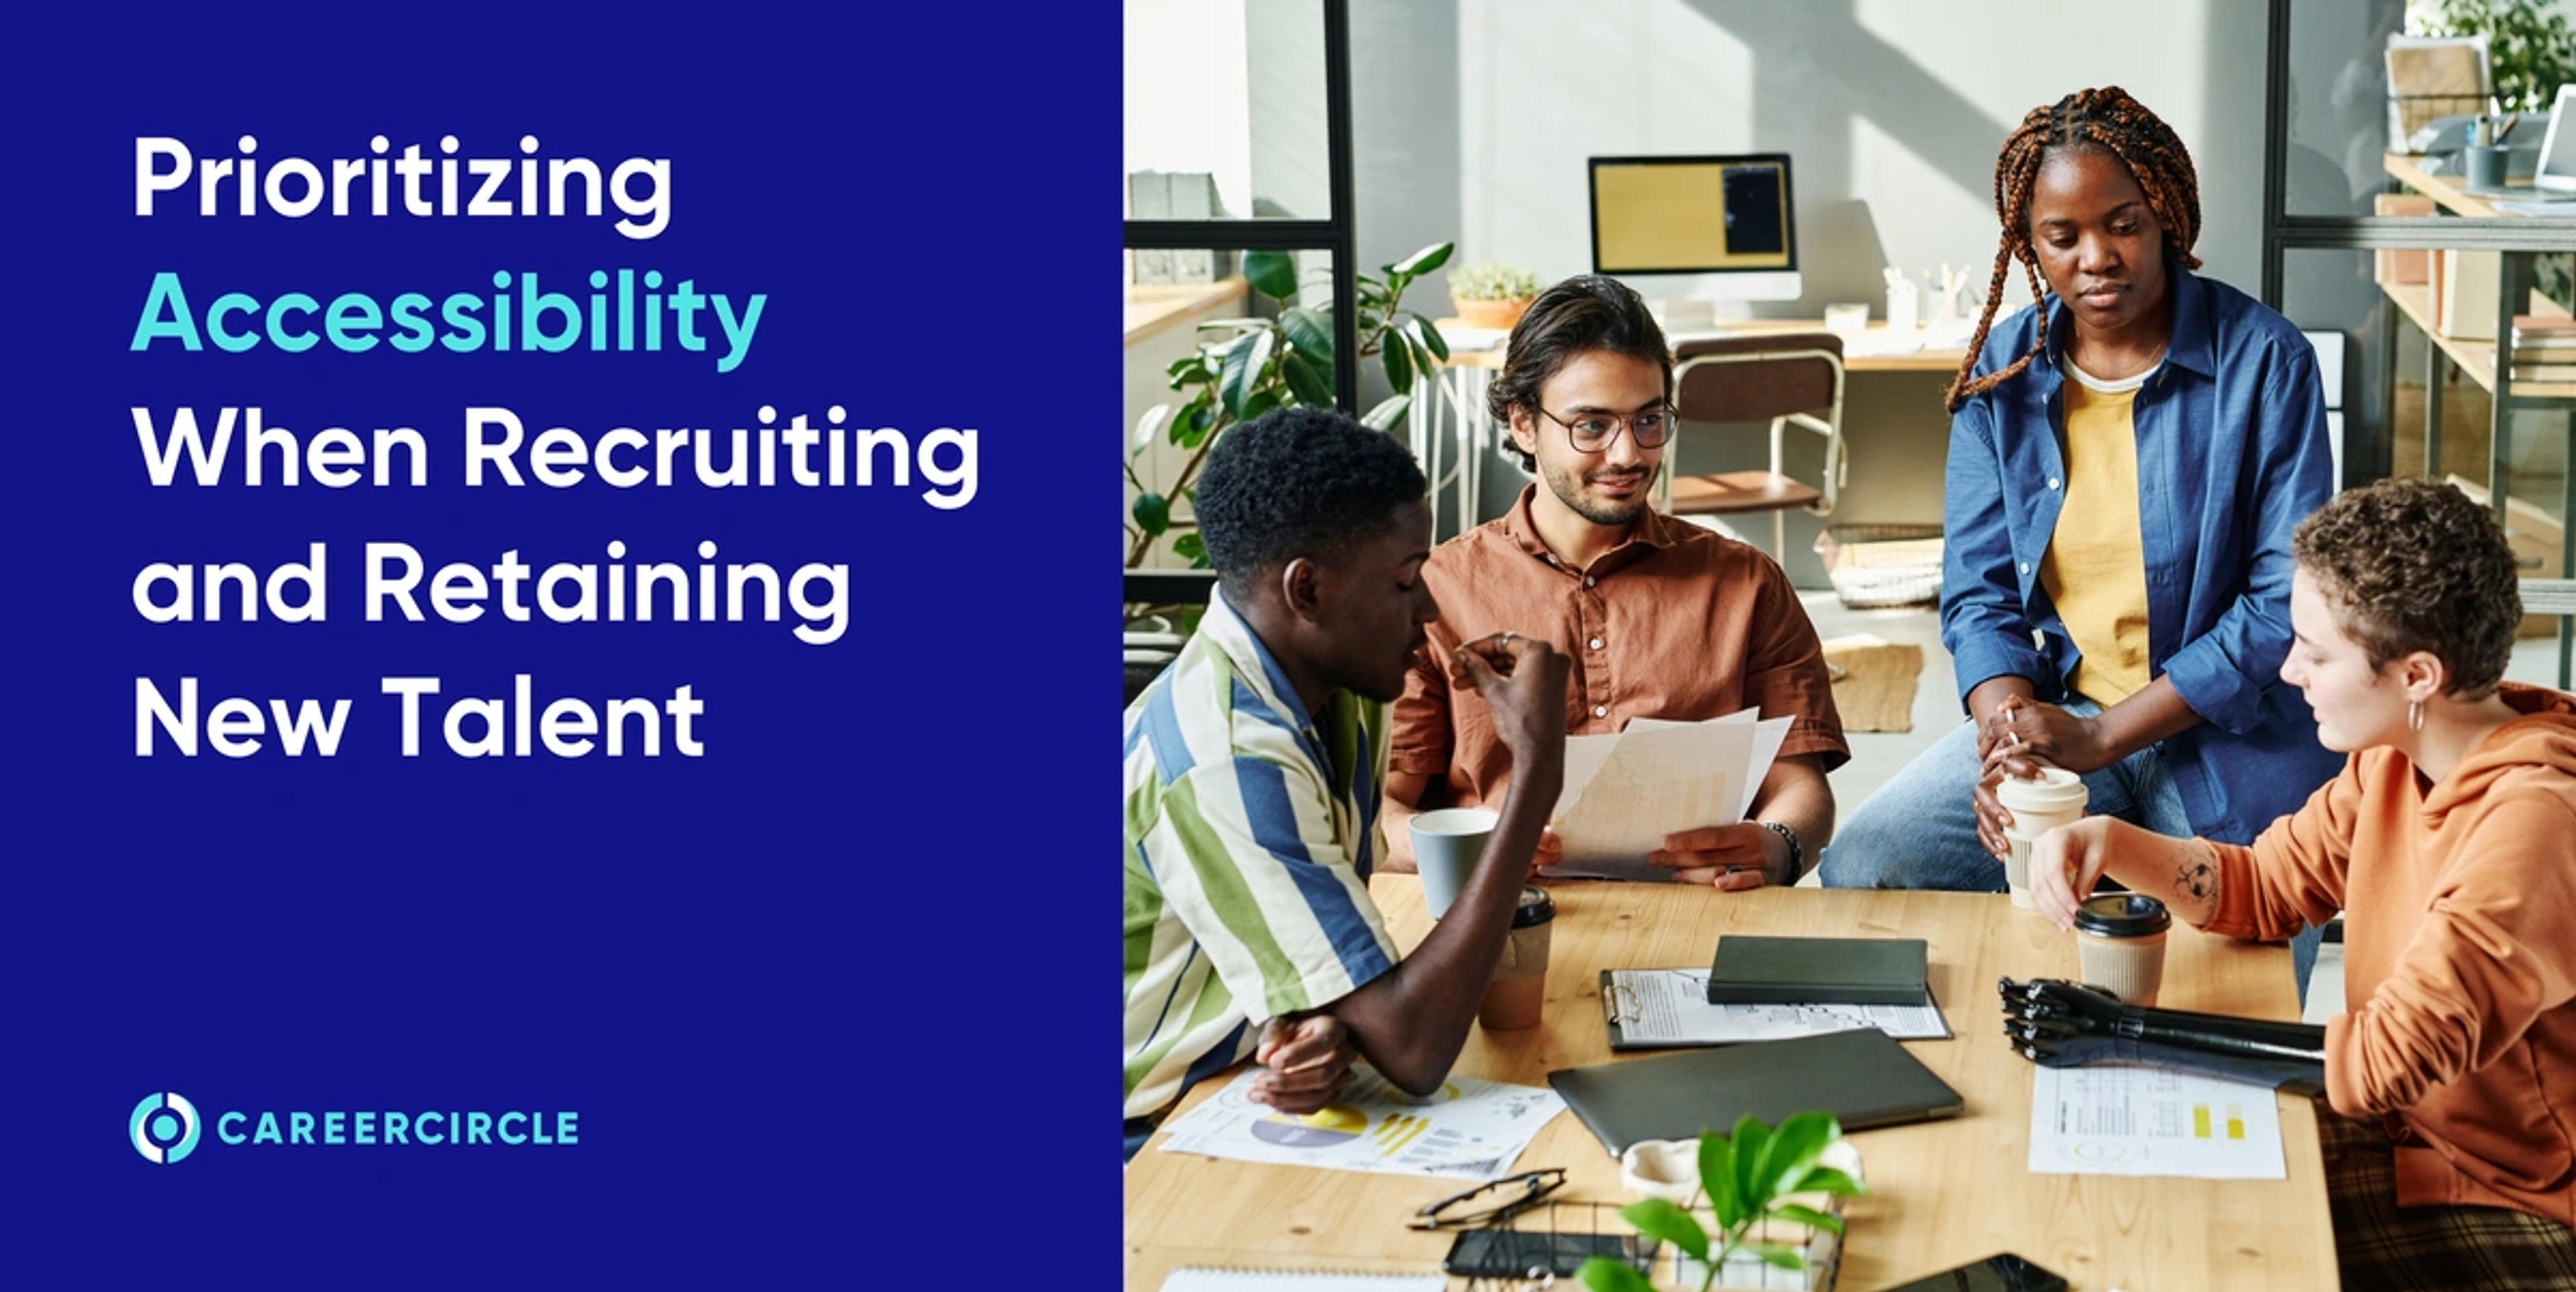 image reads prioritizing accessibility when recruiting and retaining new talent with an image of the right of a diverse group of people over a table